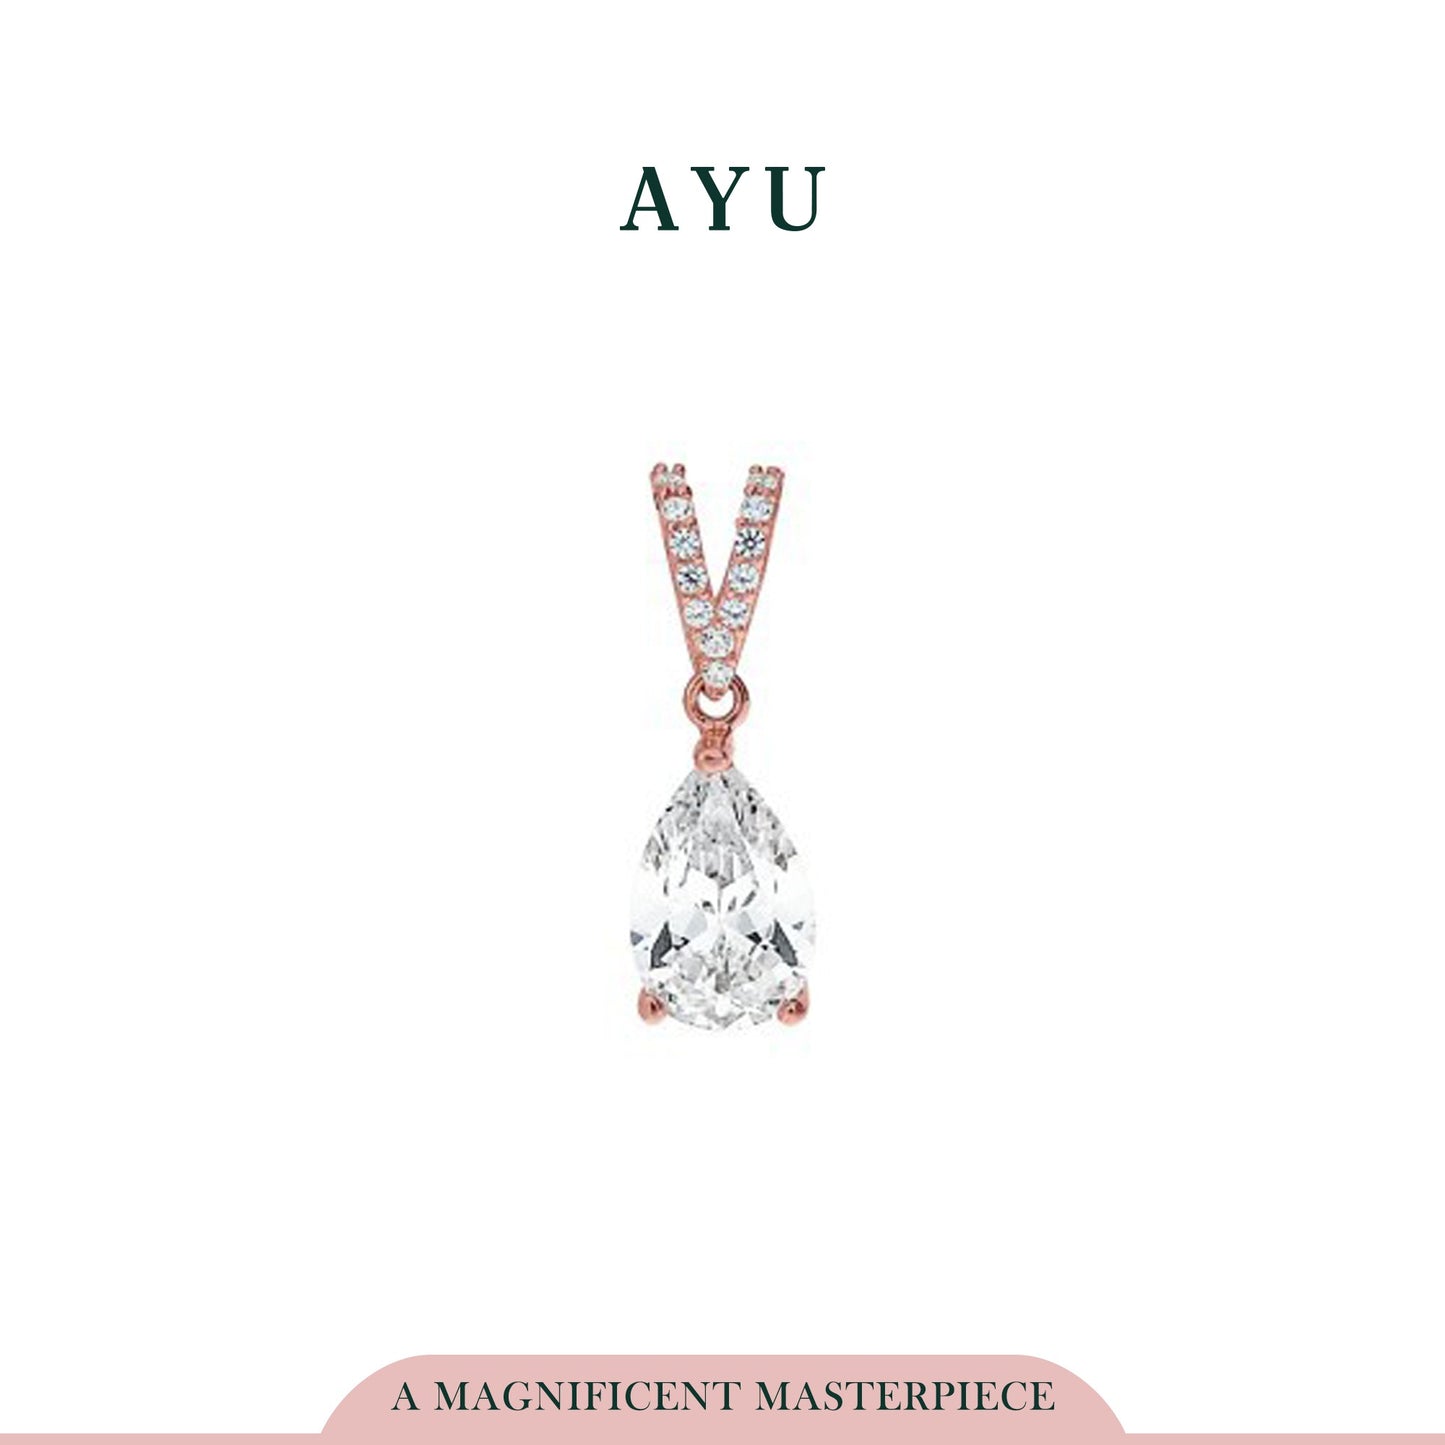 AYU TEARDROP SOLITAIRE PENDANT WITH V SF 17K ROSE GOLD